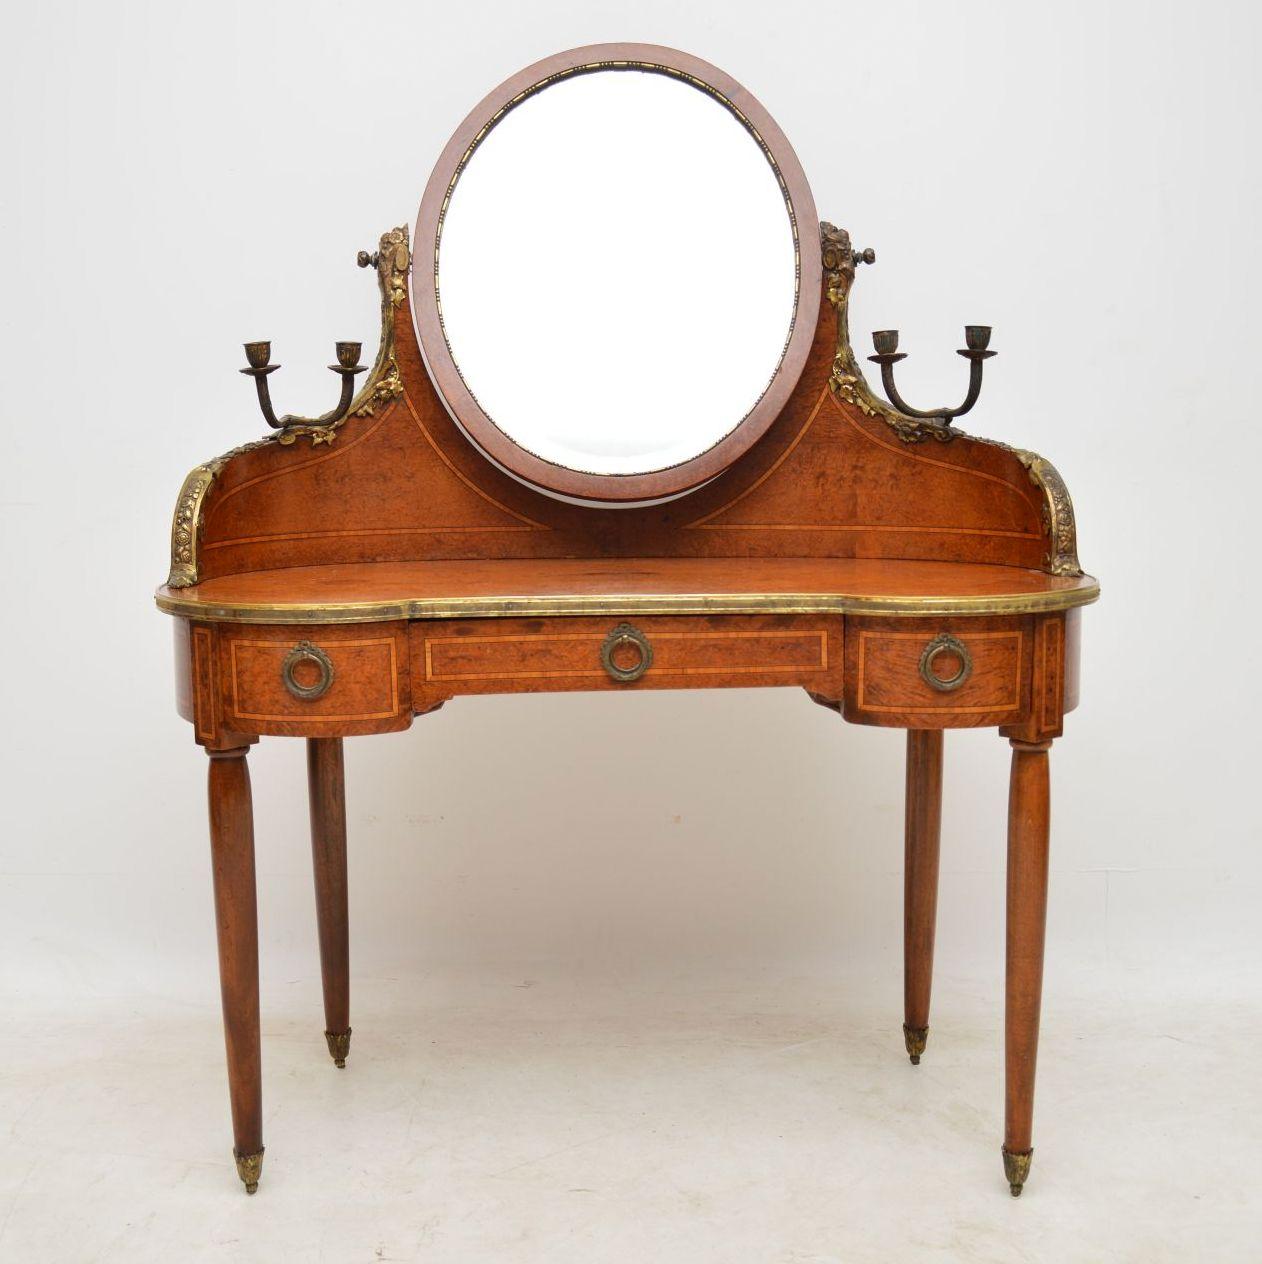 This stunning antique French dressing table is very high quality and has fabulous features. The wood looks like a very tight burr walnut, but it could be something more exotic like Amboyna. We have had it polished, however there is natural ageing